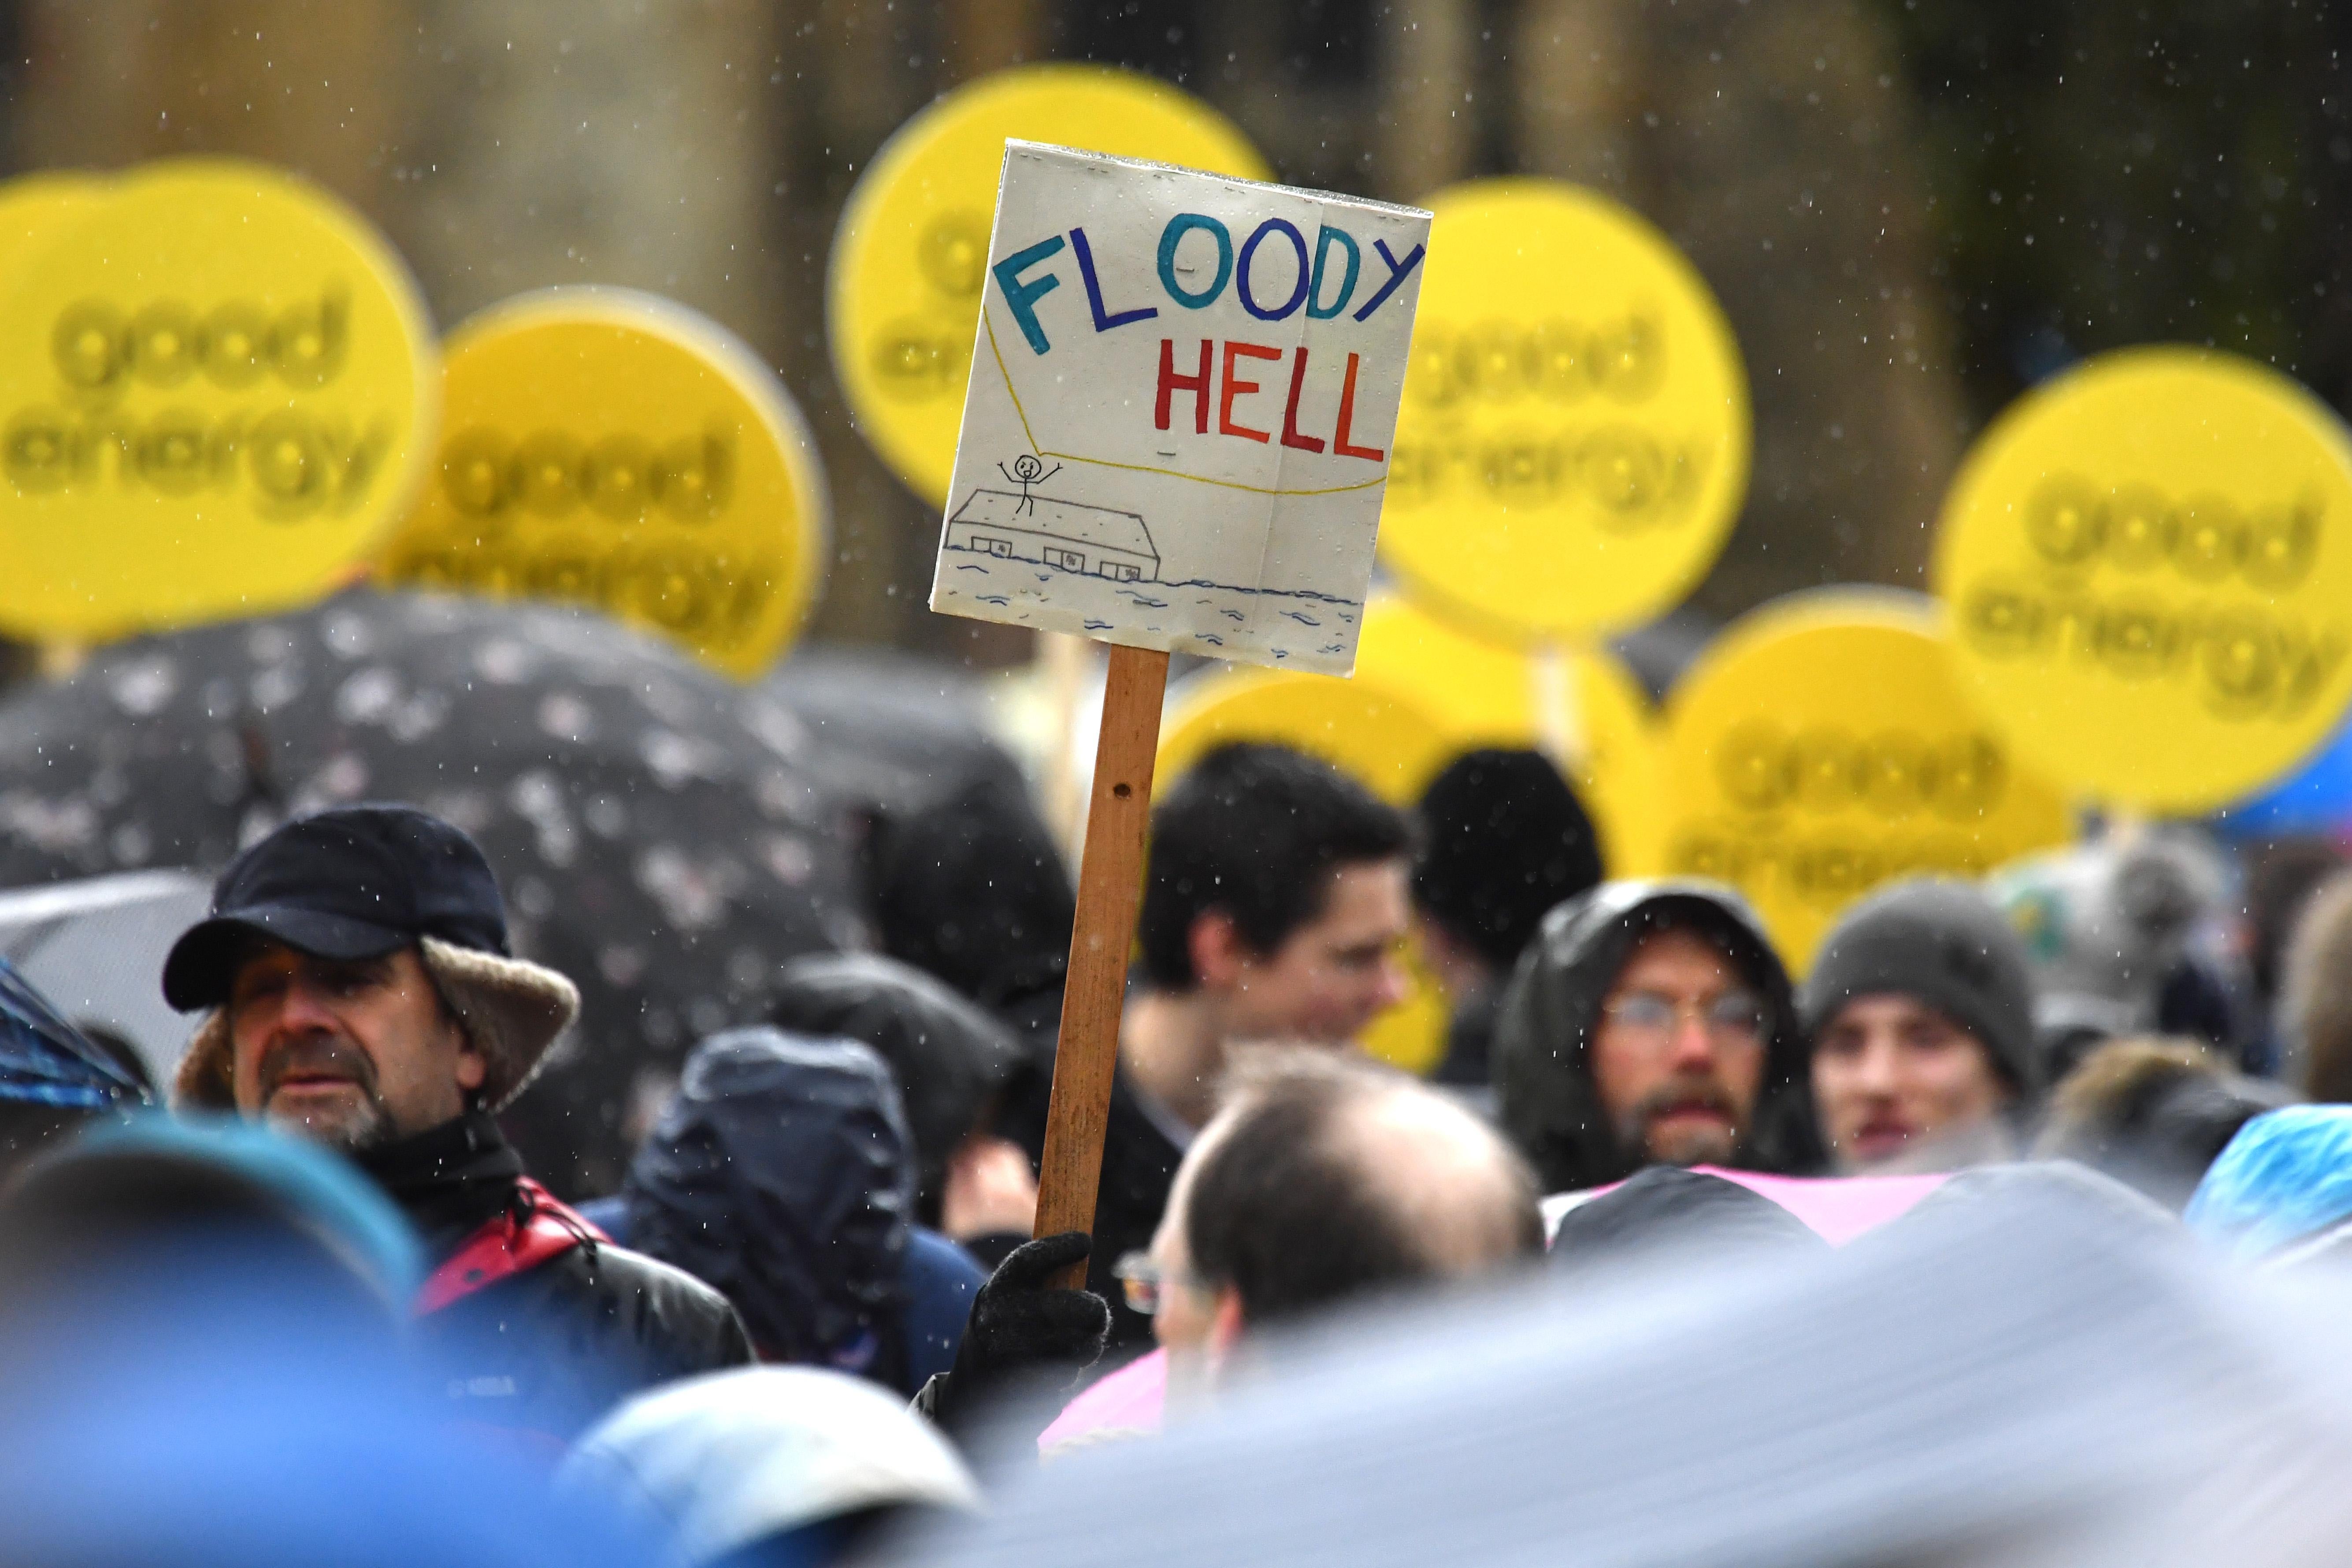 A crowd of protesters holding signs that say "Good energy" and one that says "Floody Hell"